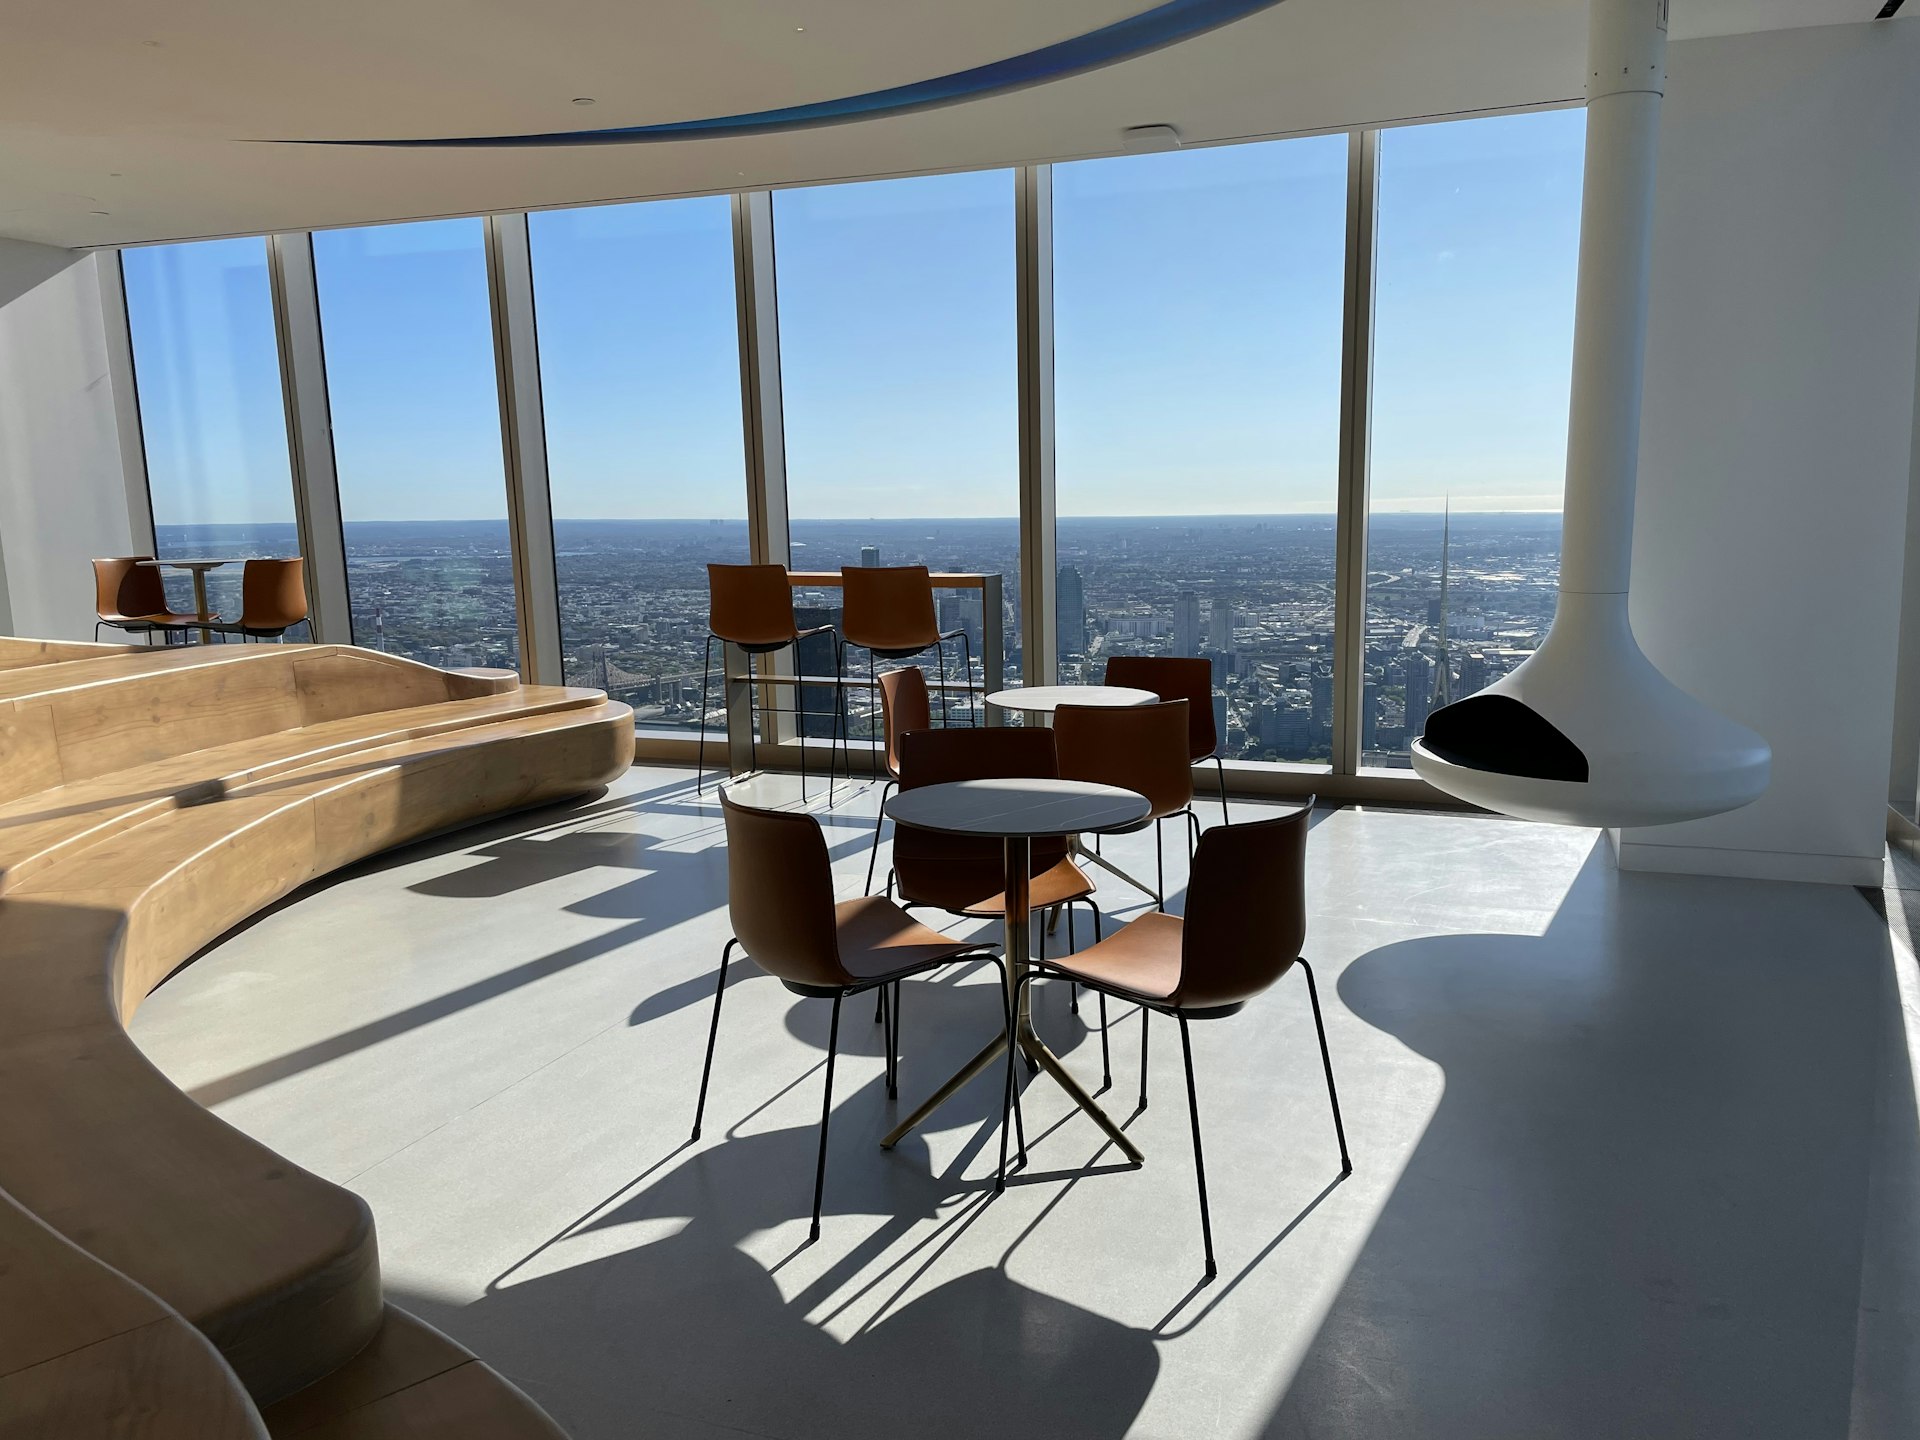 A seating area in a high-rise skyscraper, with views overlooking Manhattan